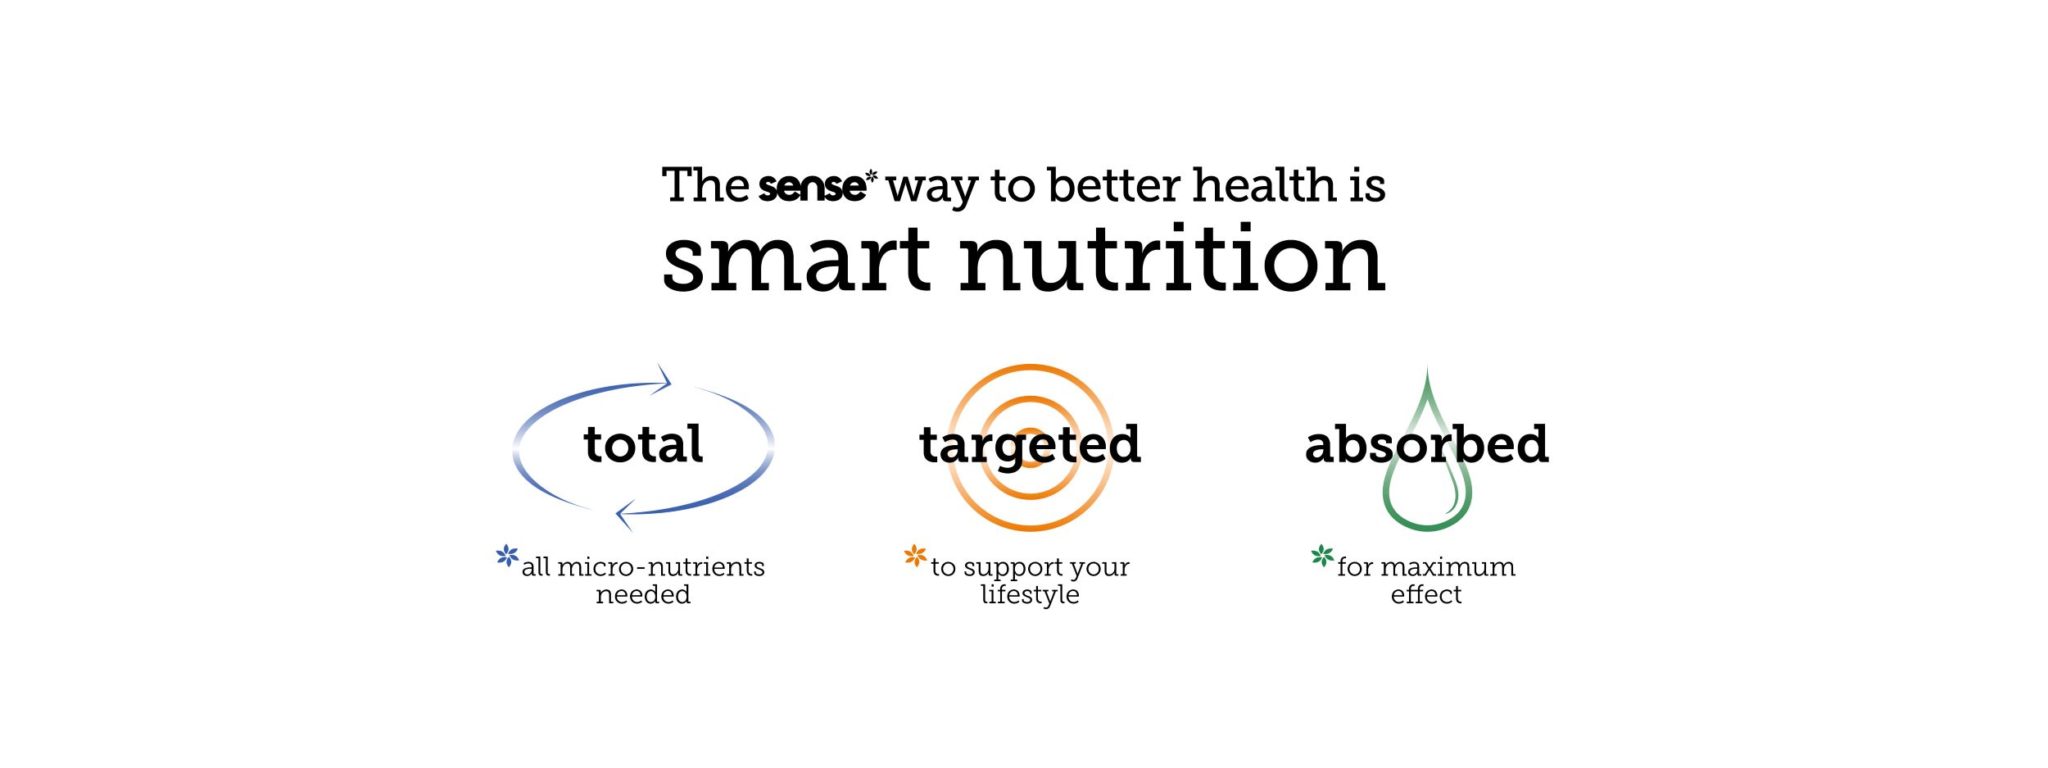 The way to better health is smart nutrition via total targeted absorbed nutrition